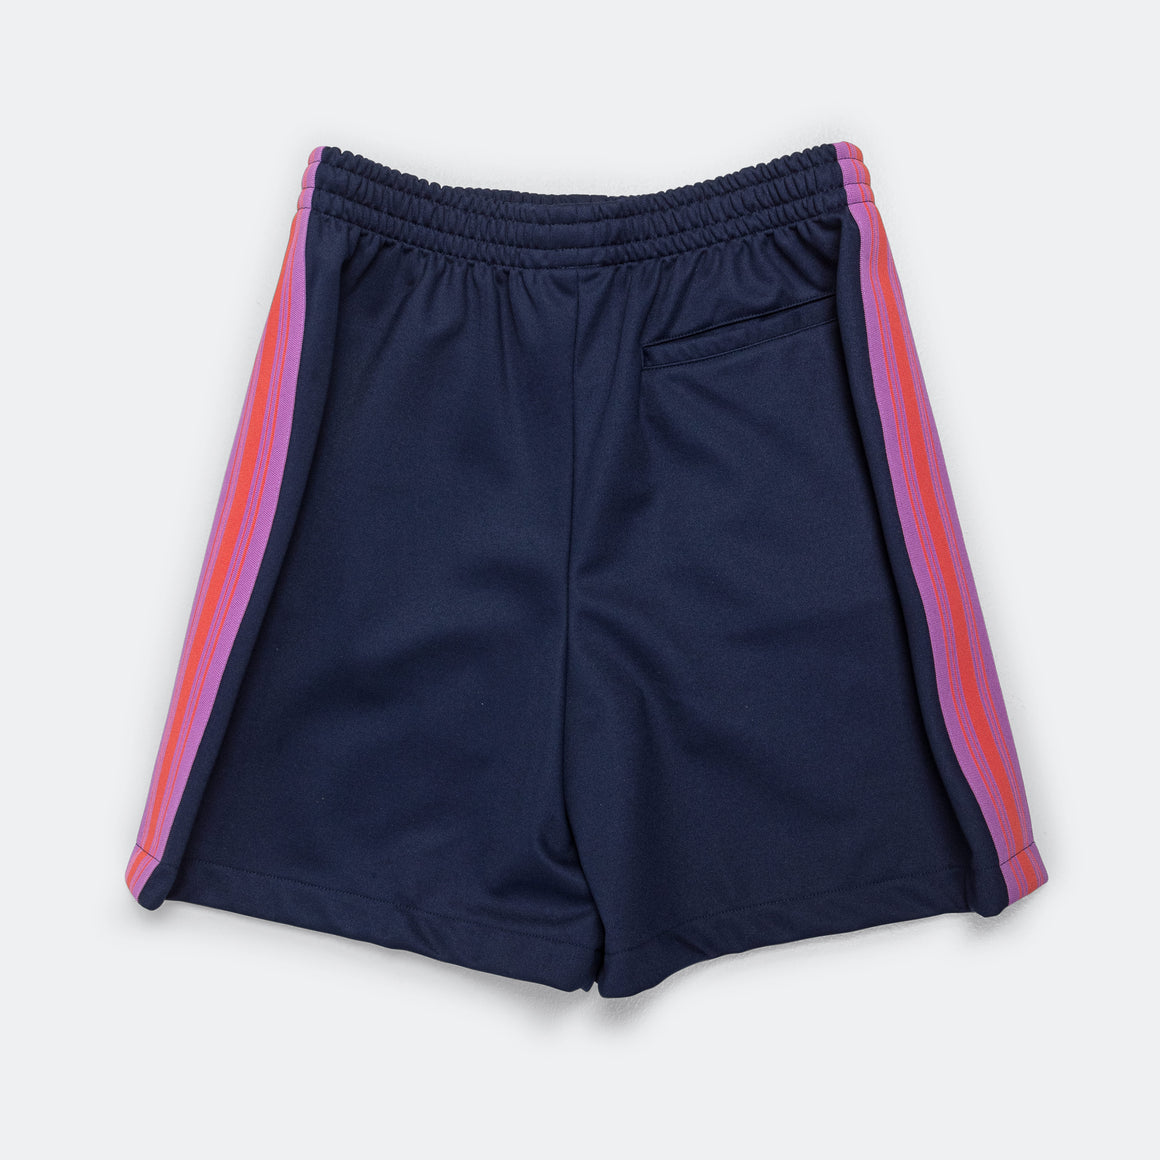 For The Homies - Lane Short - Navy - UP THERE